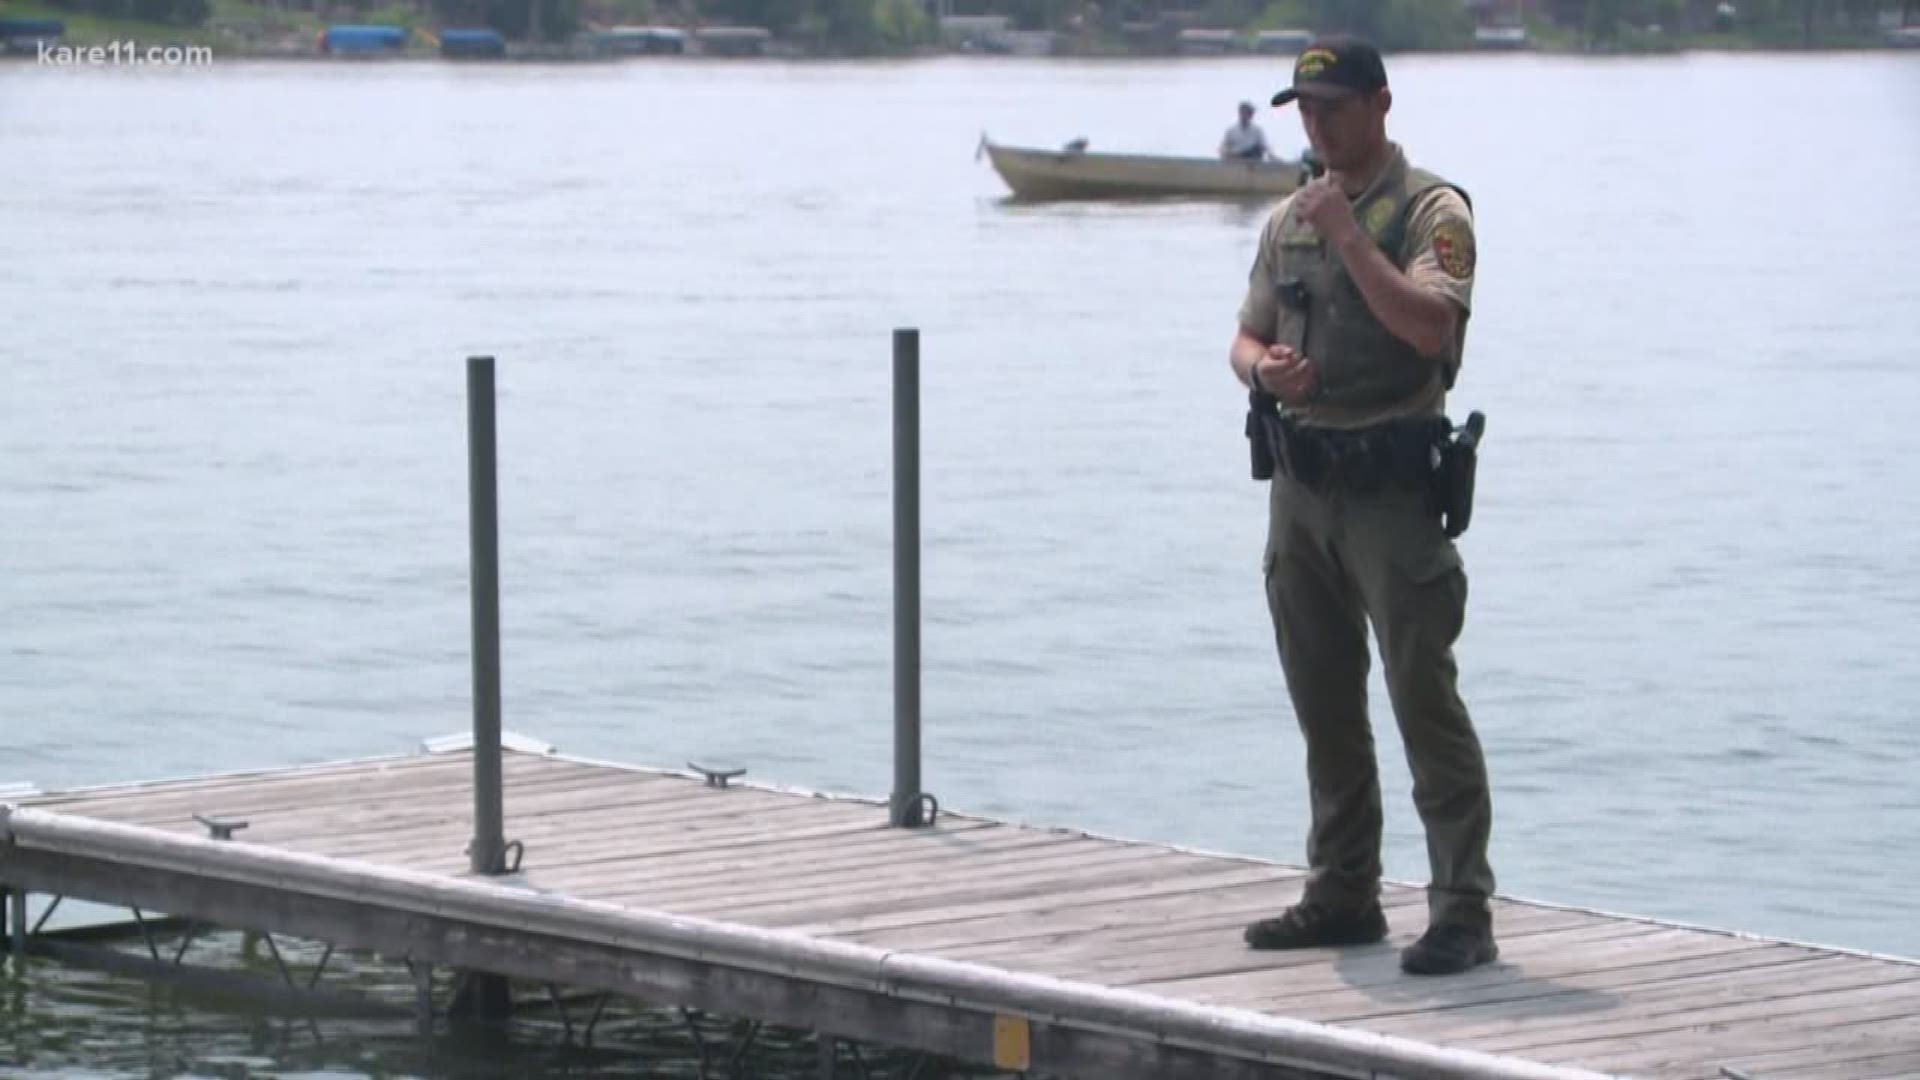 With high water levels, The DNR says wake can cause significant shoreline damage.